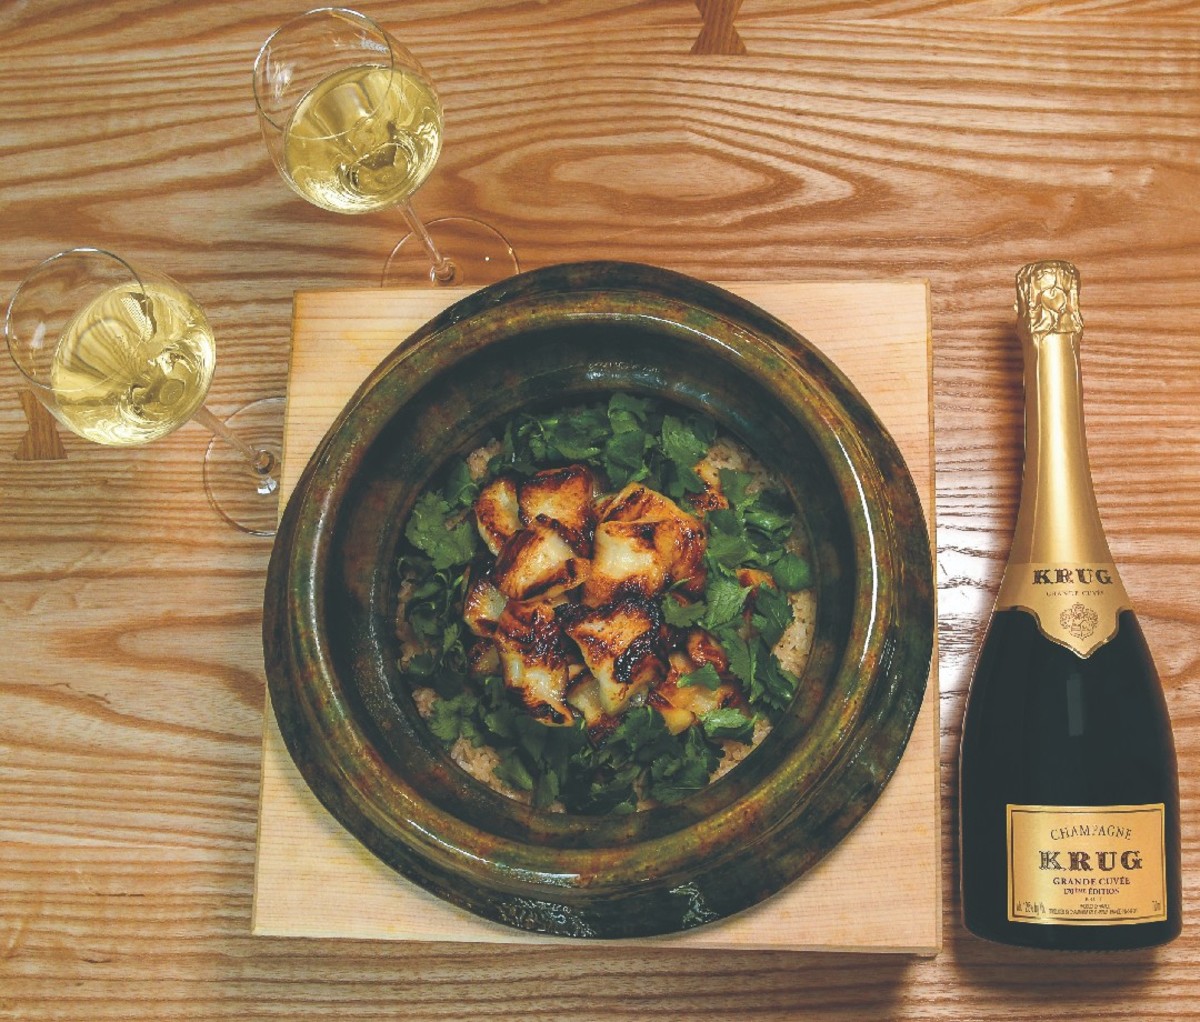 Bottle of Champagne and two filled glasses beside a plate of black cod and saikyo miso rice